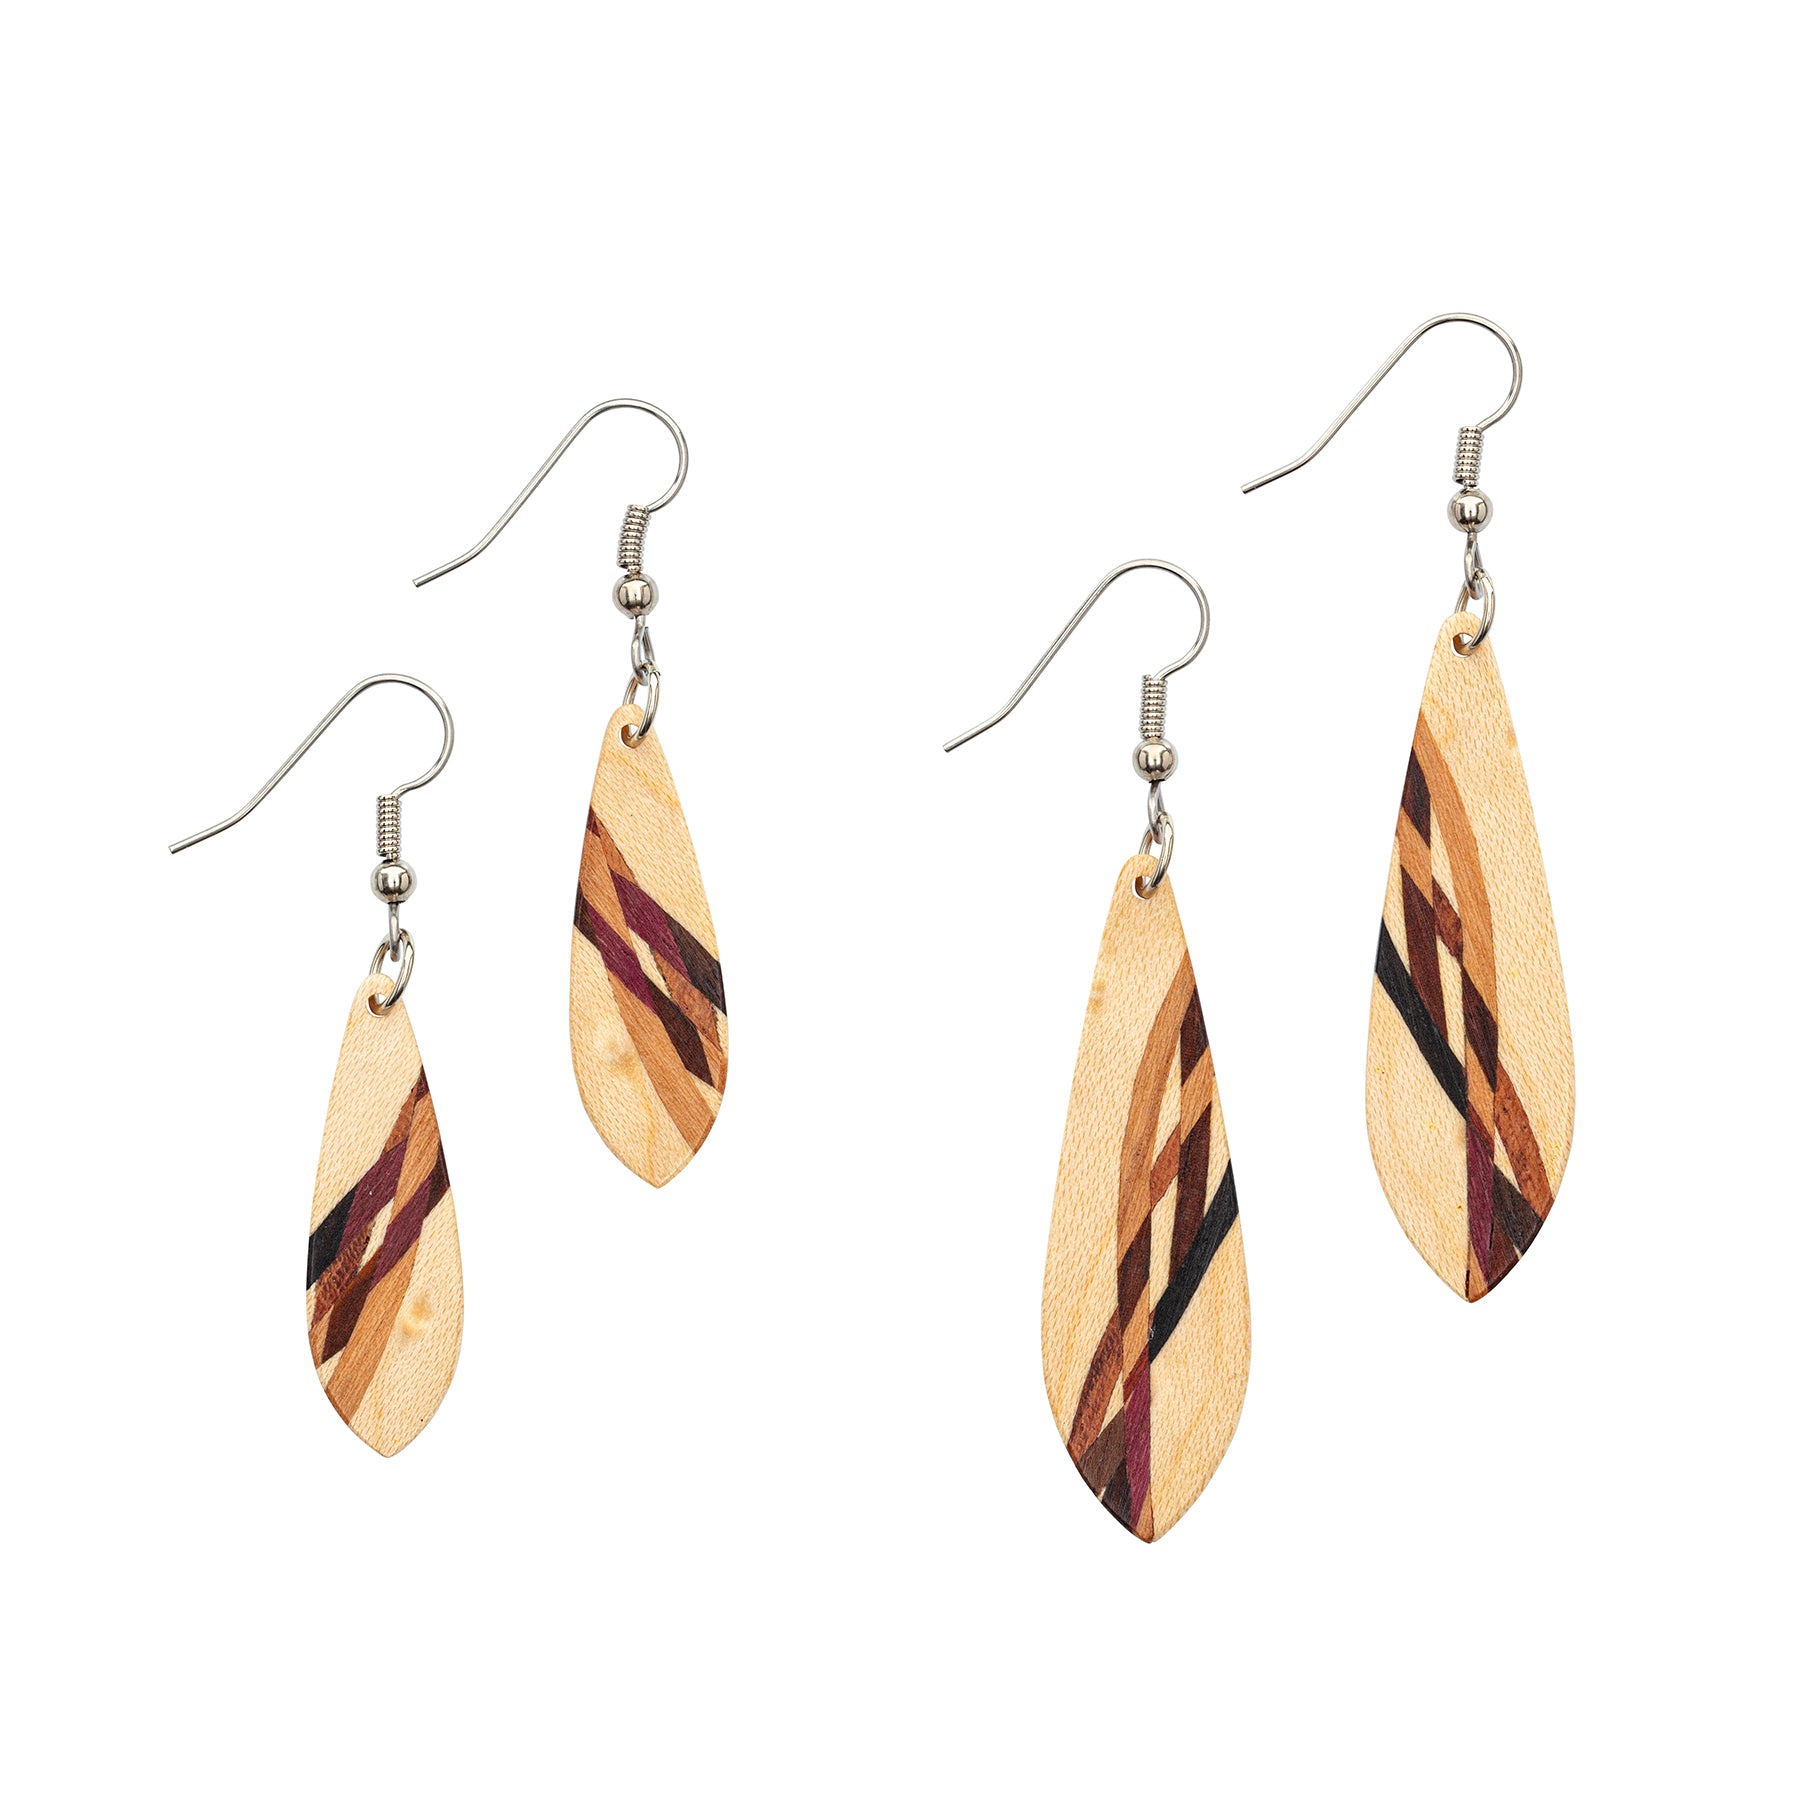 Inlay earrings marquis small and large